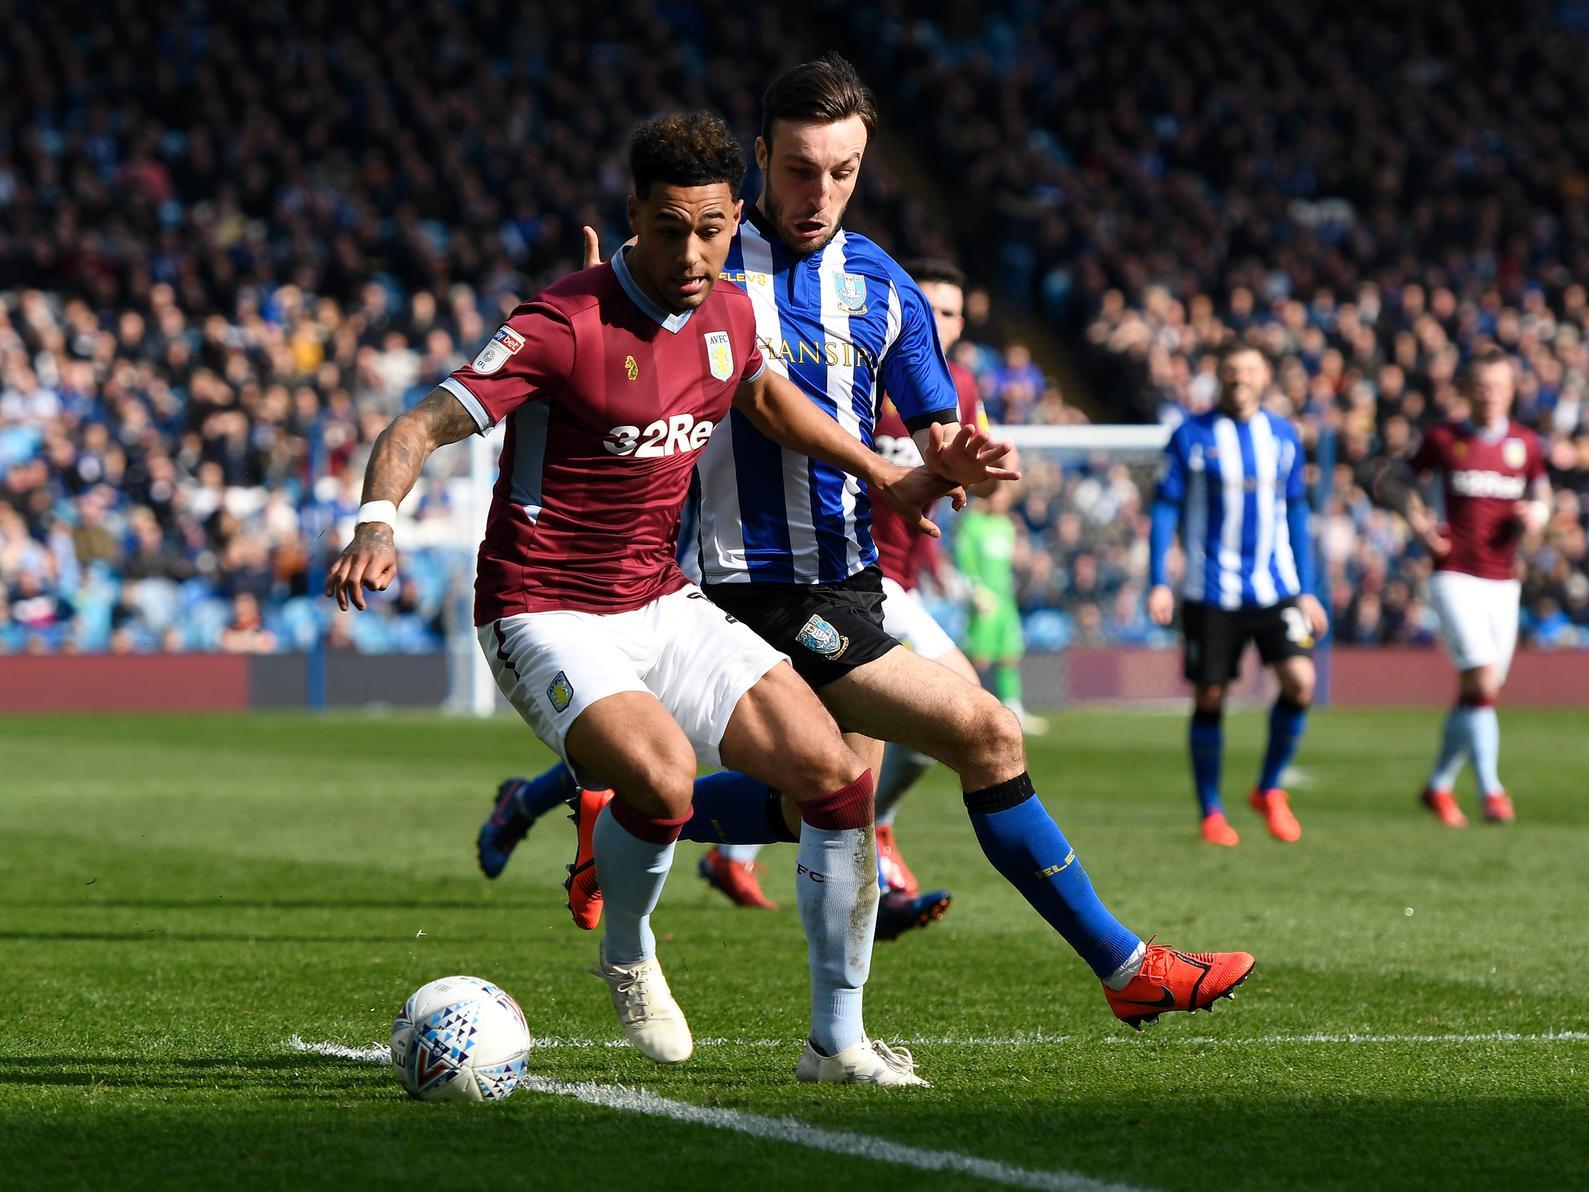 Brentford are said to be keen on Aston Villa forward Andre Green, who is likely to be recalled from Preston North End in January due to his limited number of first team opportunities. (The 72)